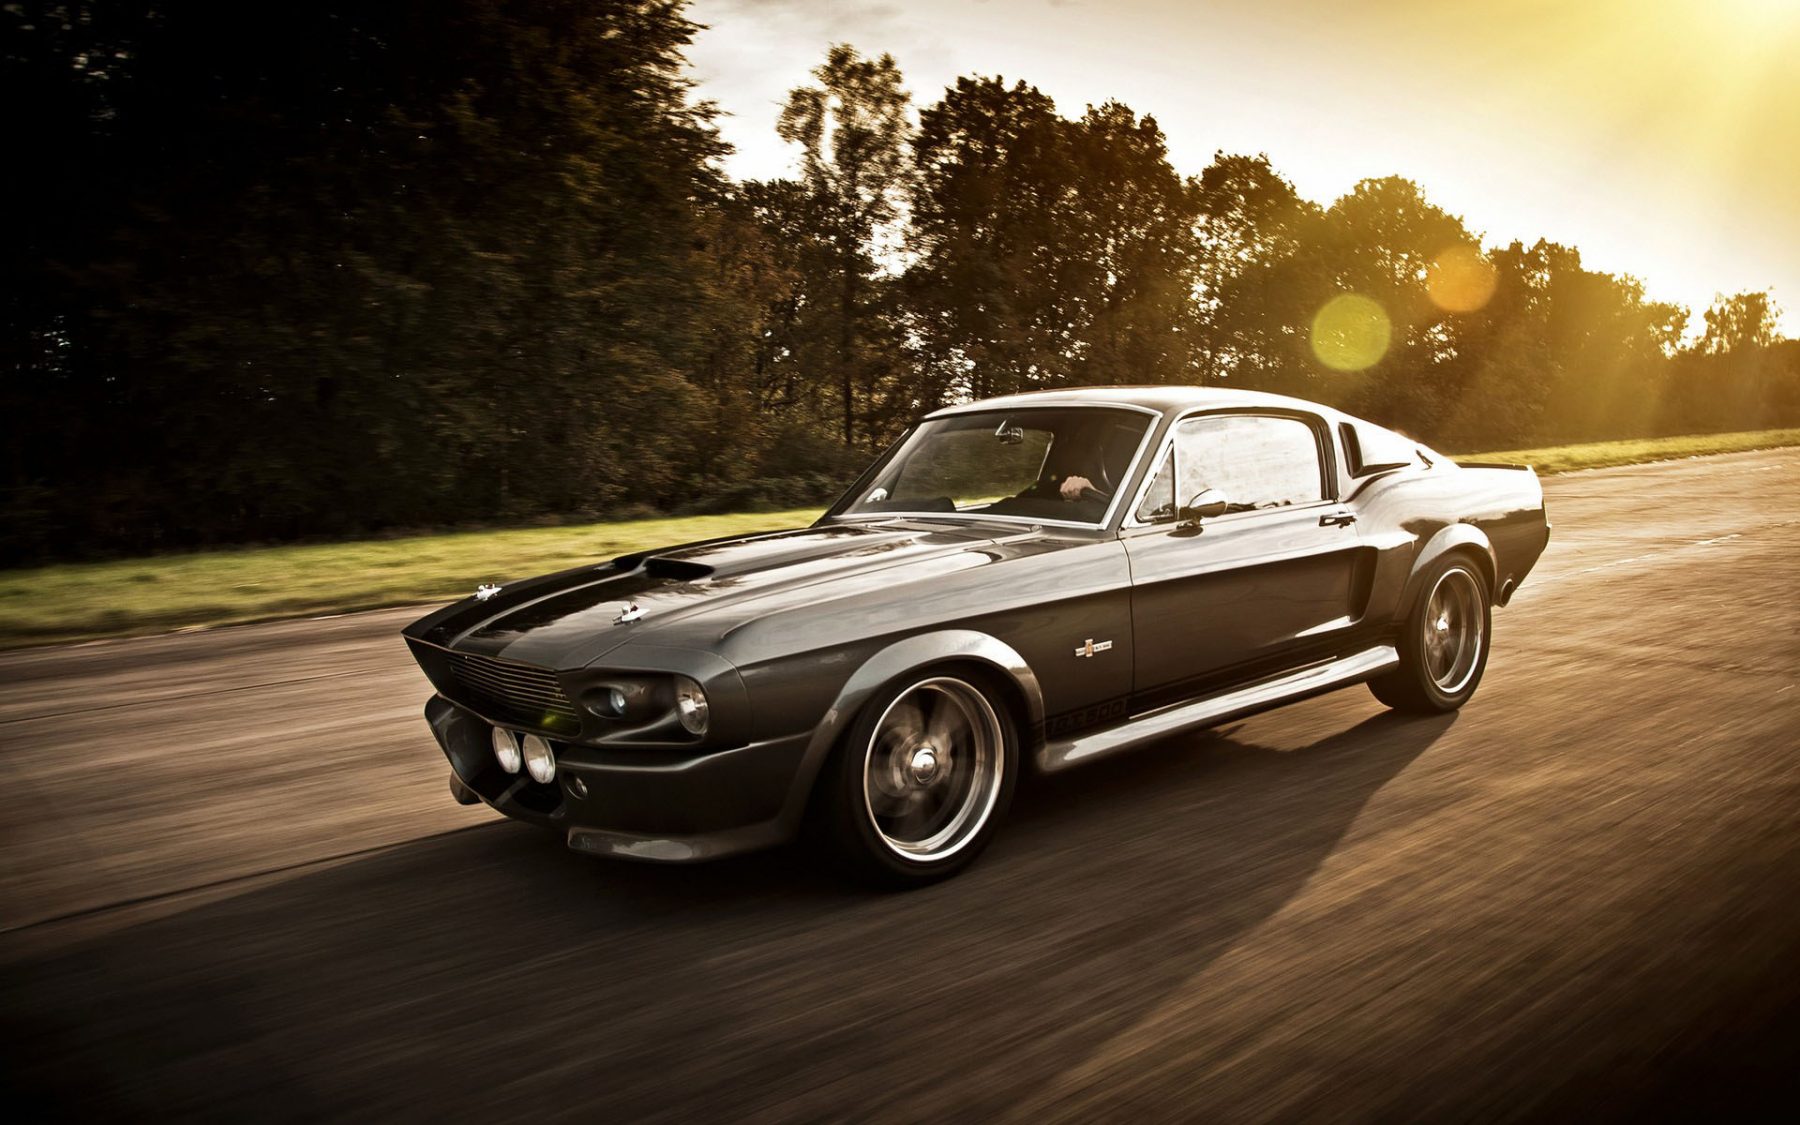 1967 Ford Mustang Shelby Gt500 Hd - HD Wallpaper 